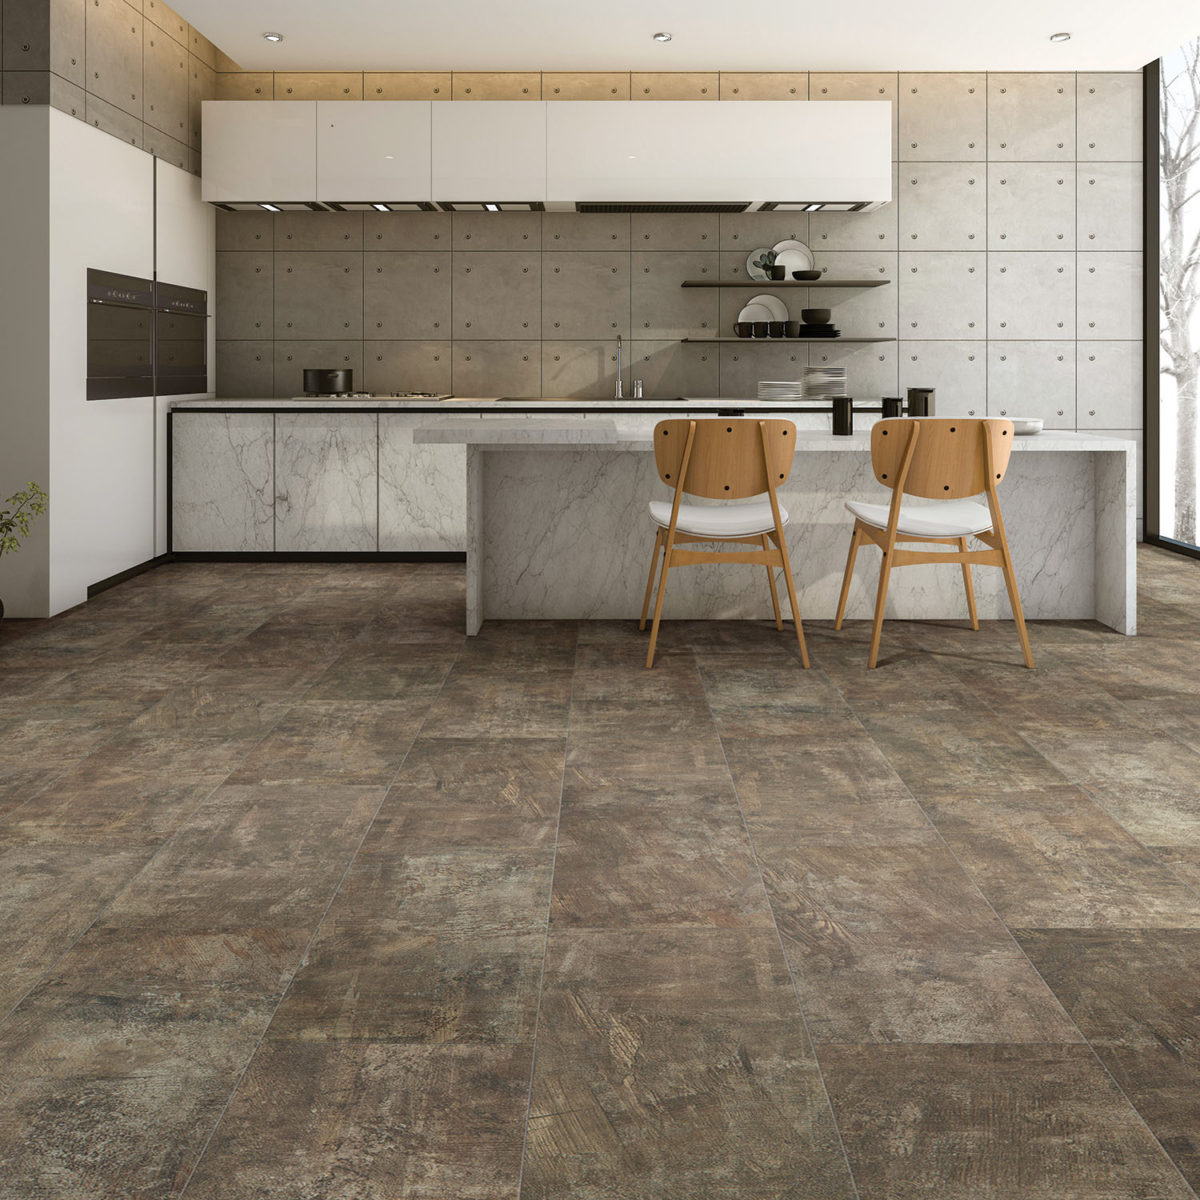 Kitchen Floors Guide Image